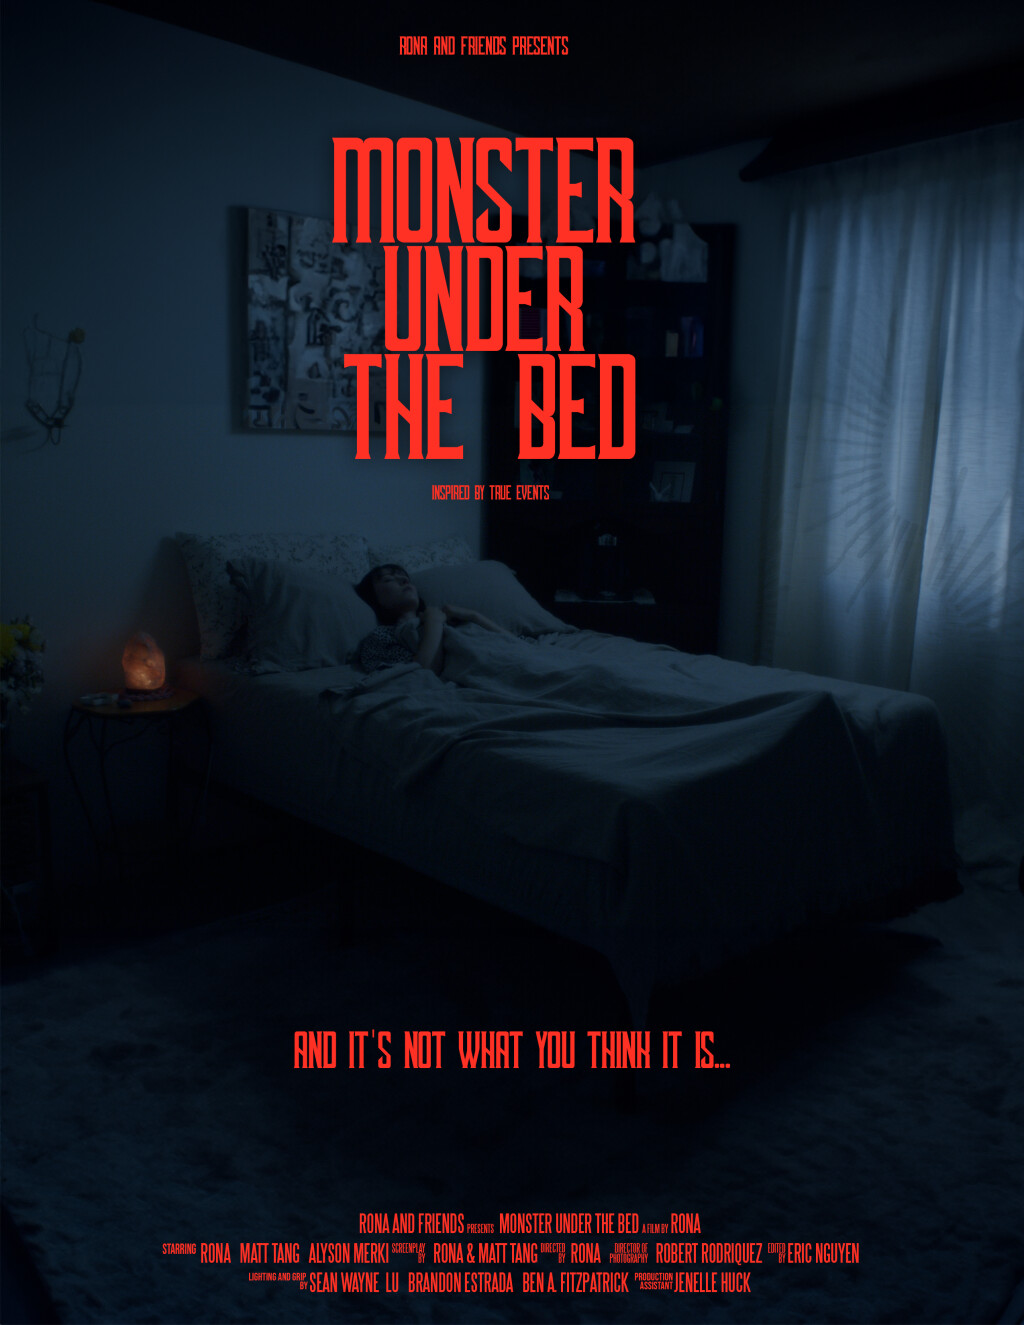 Filmposter for Monster Under the Bed